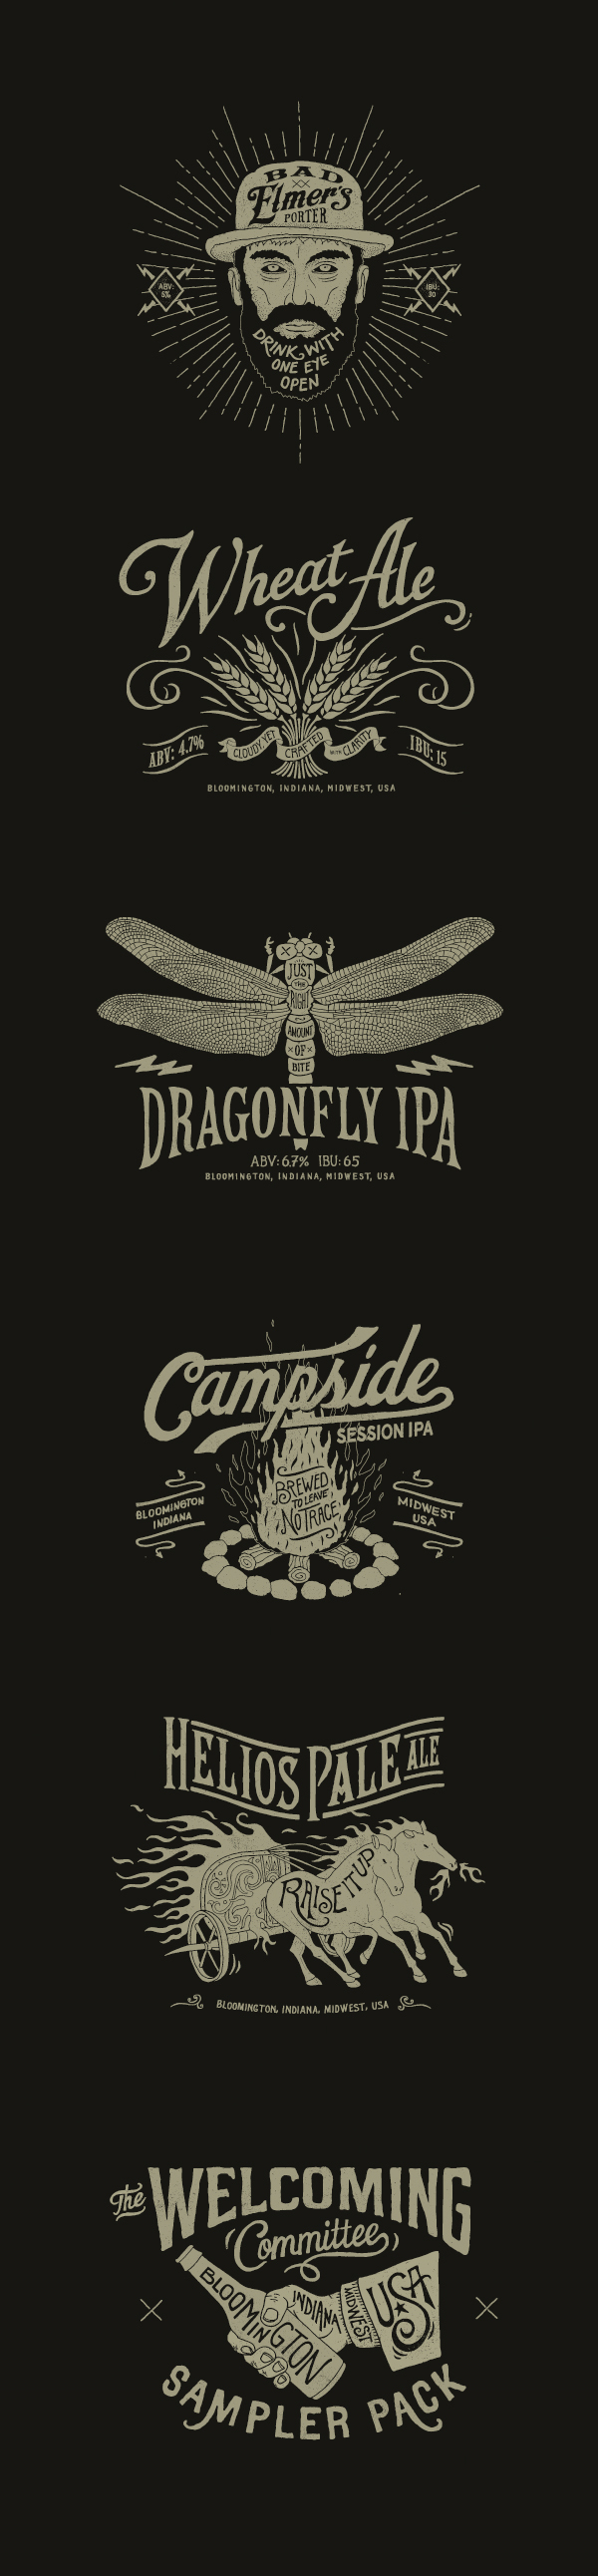 bmd design upland brewing co beer midwest hand-lettering bière usa draw dragonfly campside bad elmer's wheat ale helios parle ale Bloomington indiana